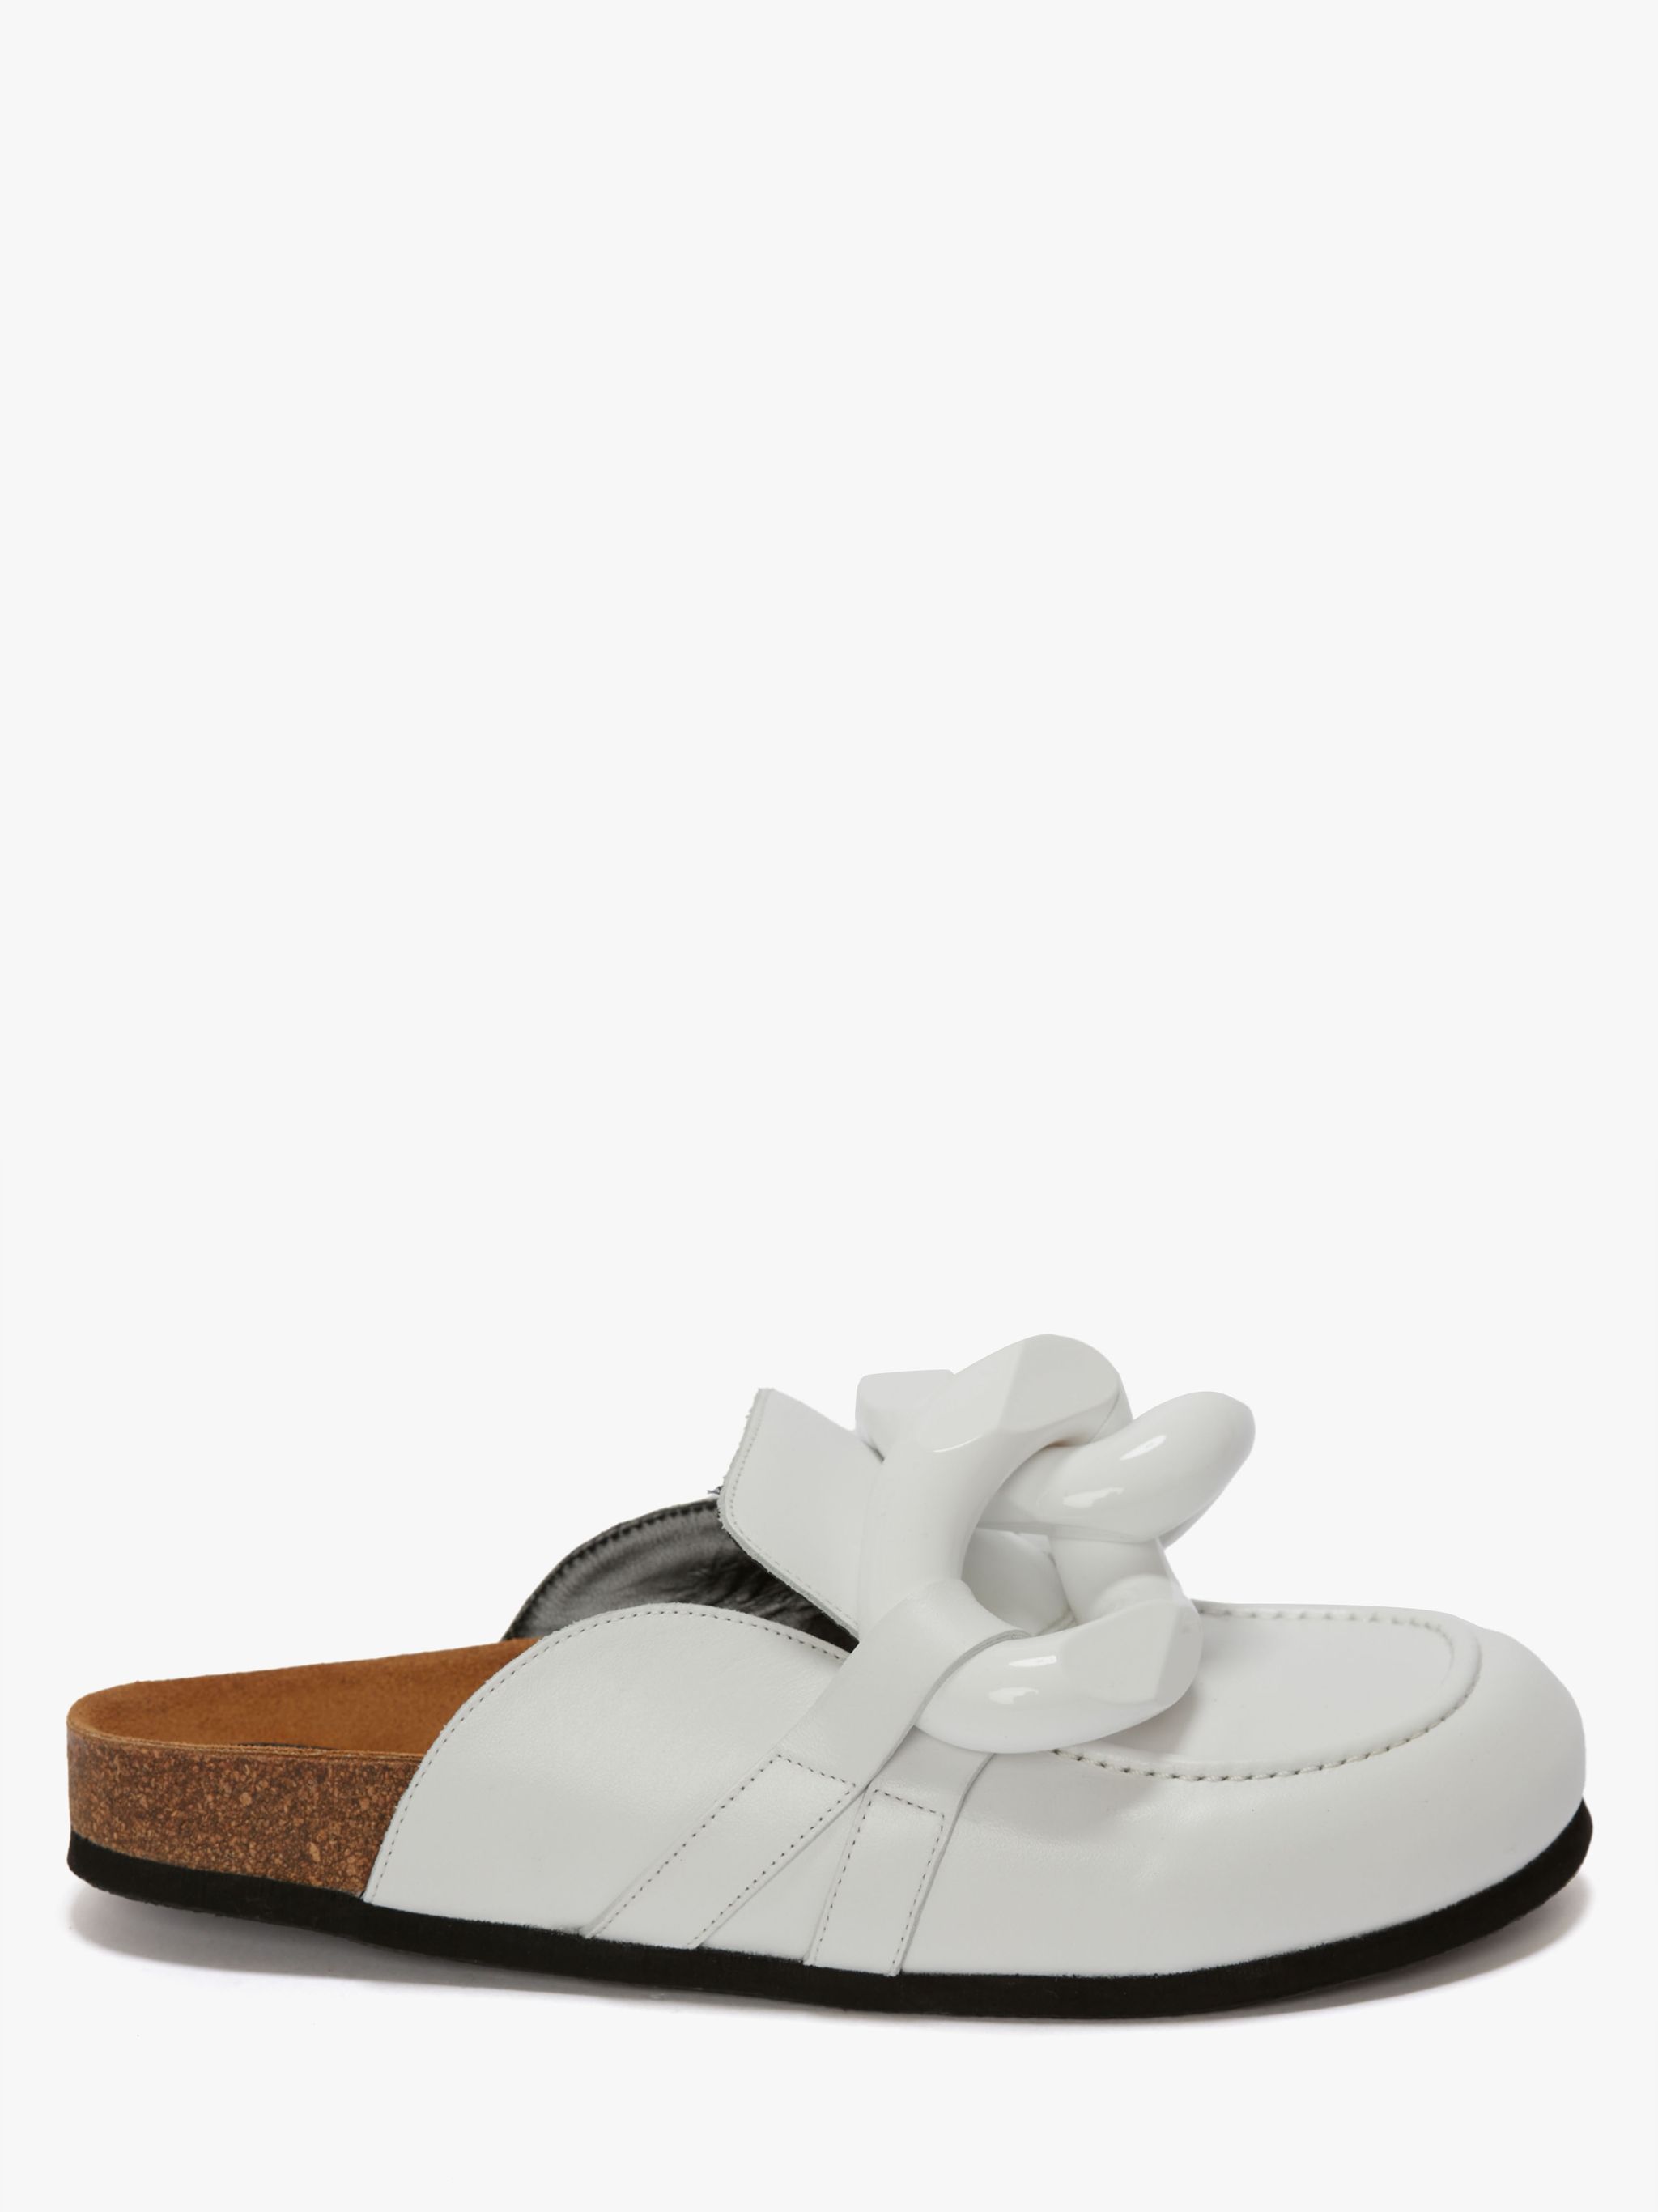 WOMEN’S CHAIN LOAFER MULES | JW Anderson